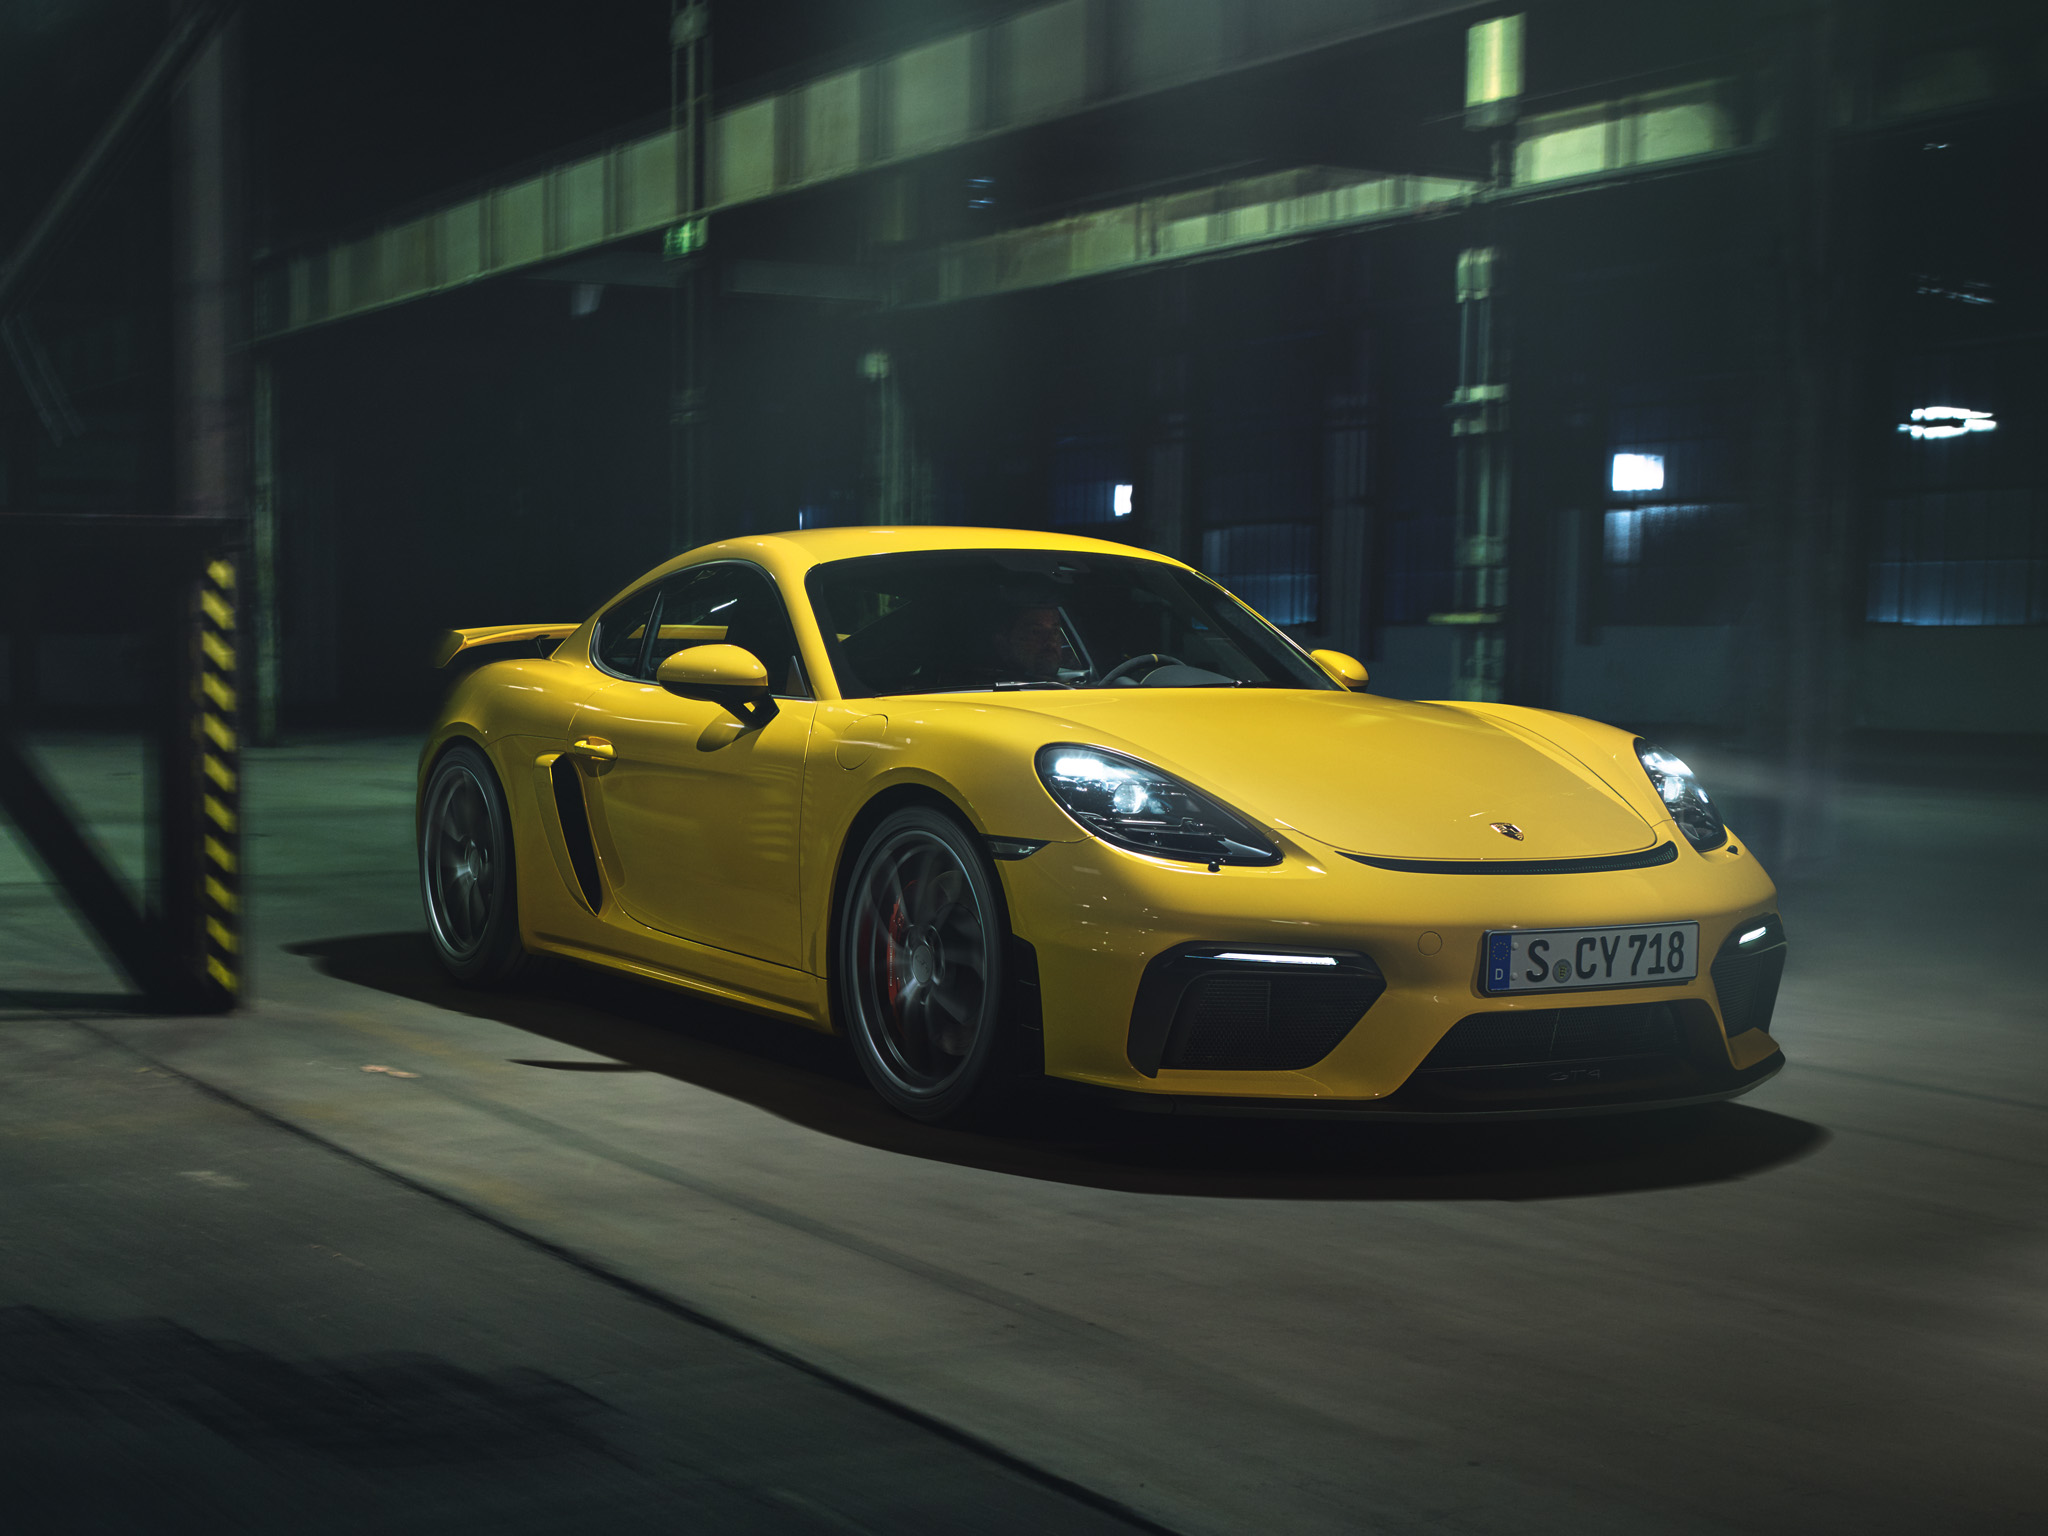 Racing Yellow 718 Cayman GT4 in industrial underground car park